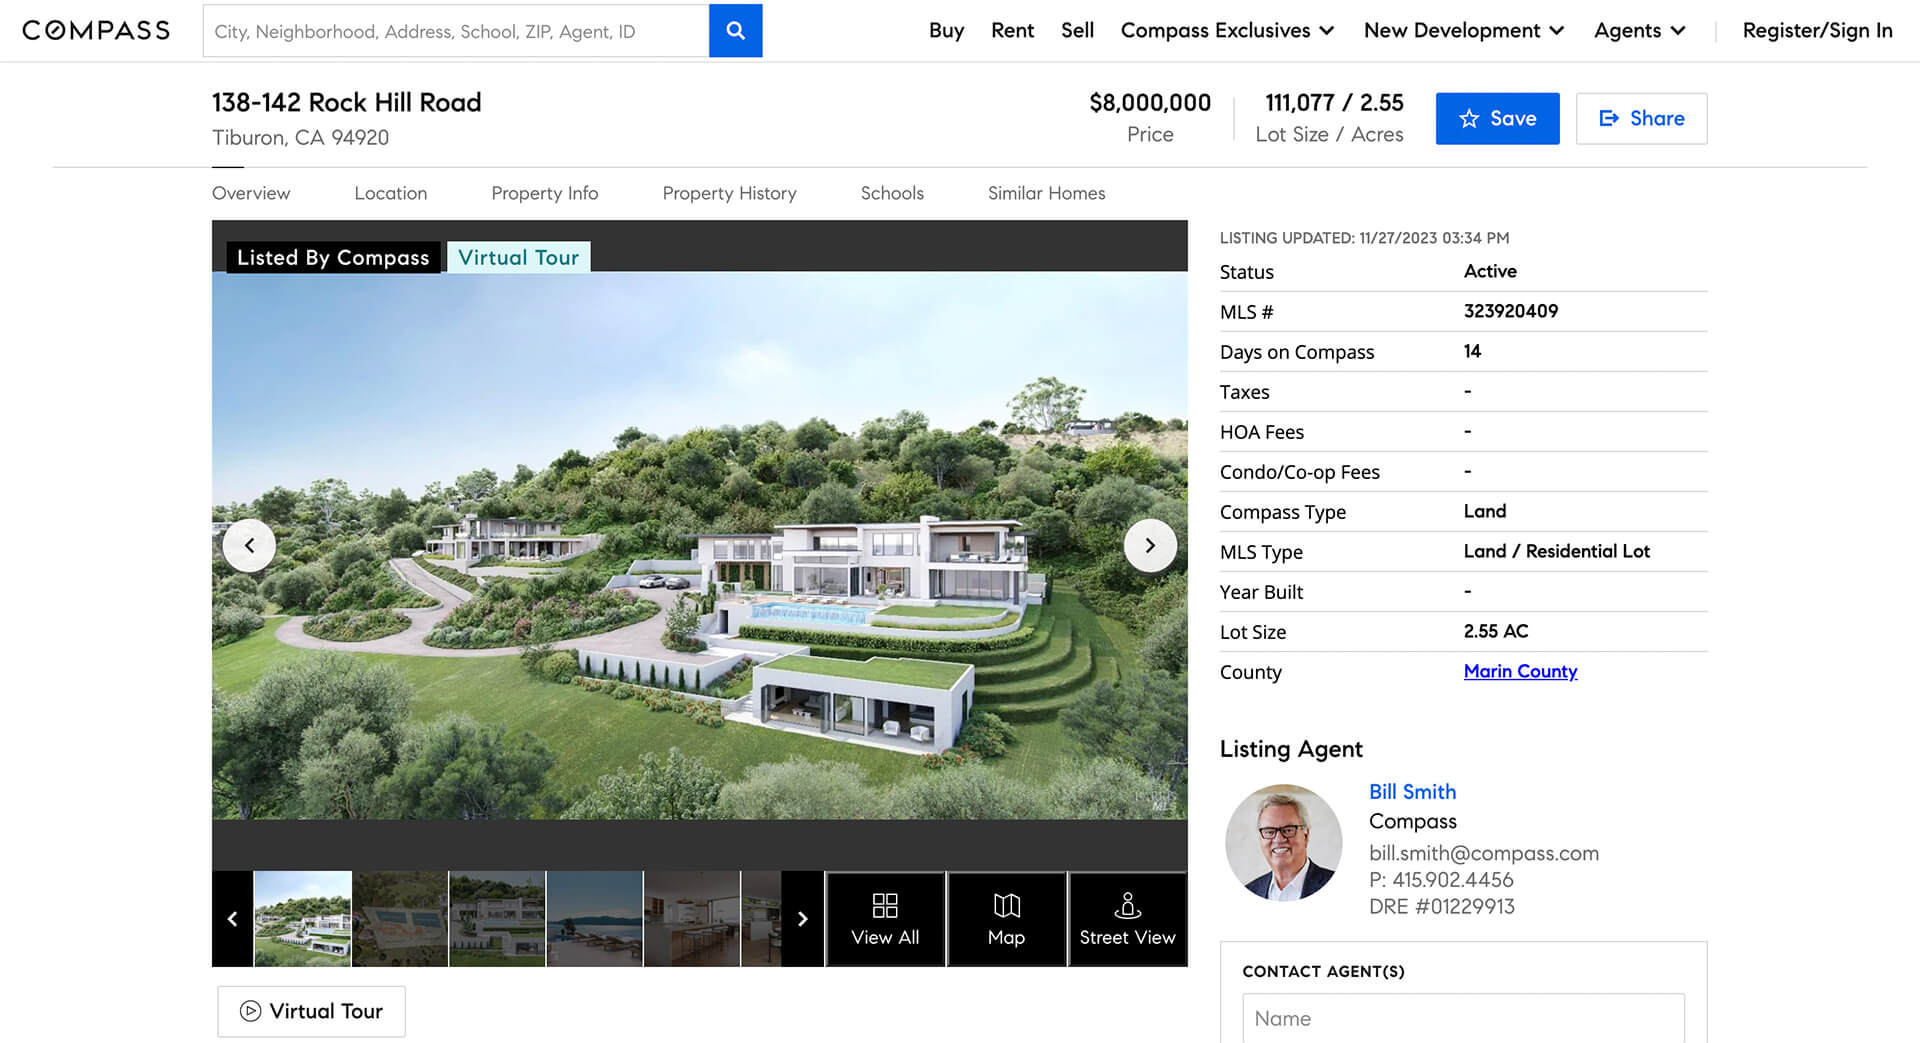 Real \estate 3D Rendering in a Property Listing